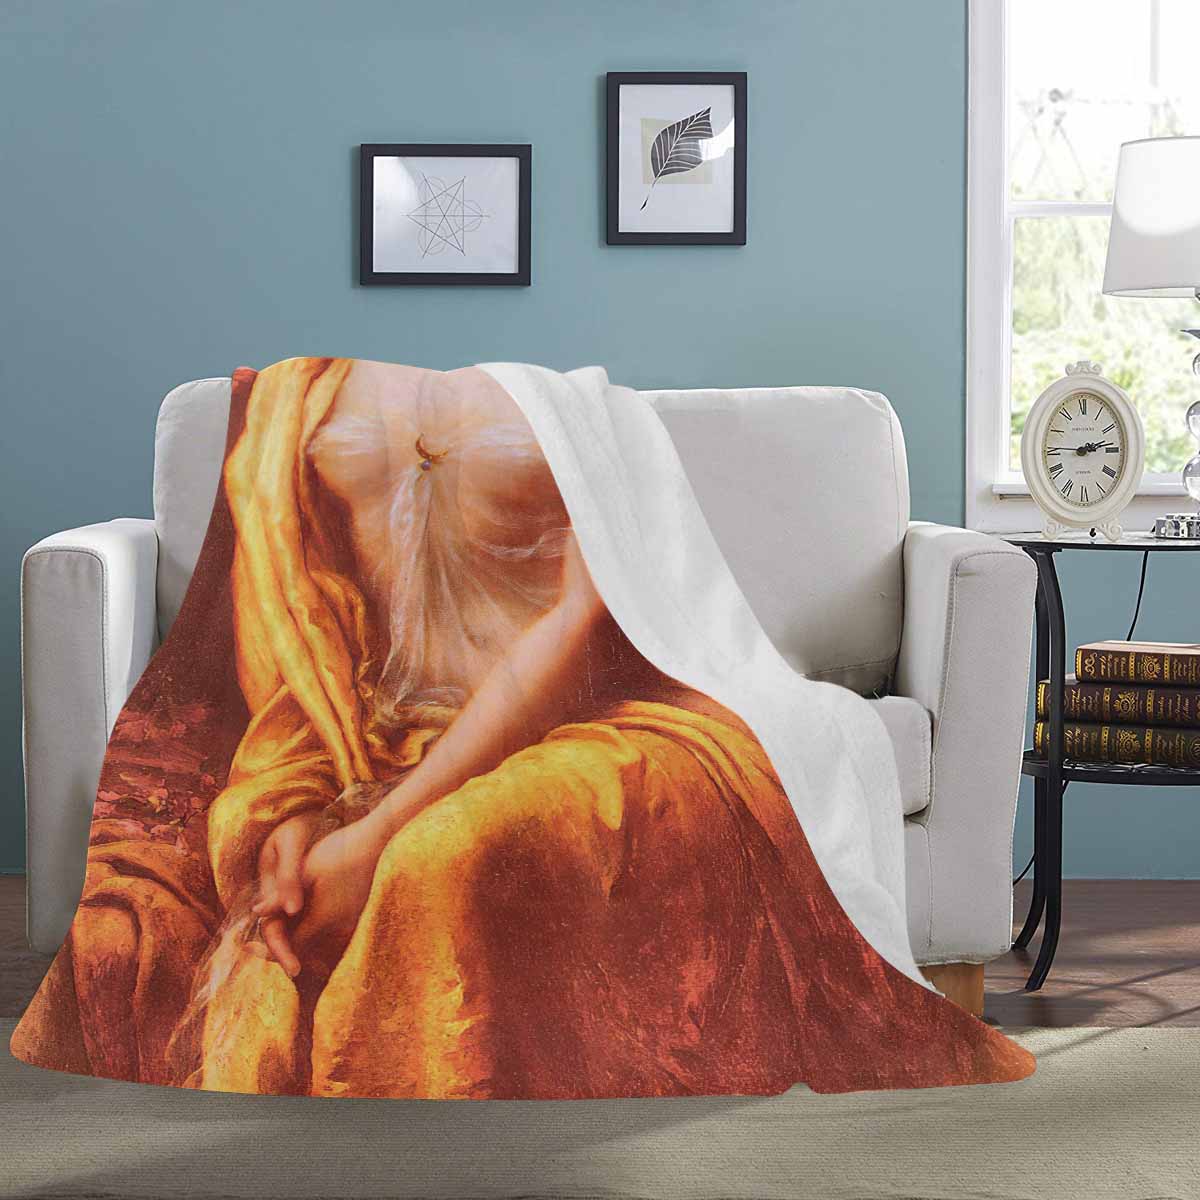 Victorian Lady Design BLANKET, LARGE 60 in x 80 in, Starlight